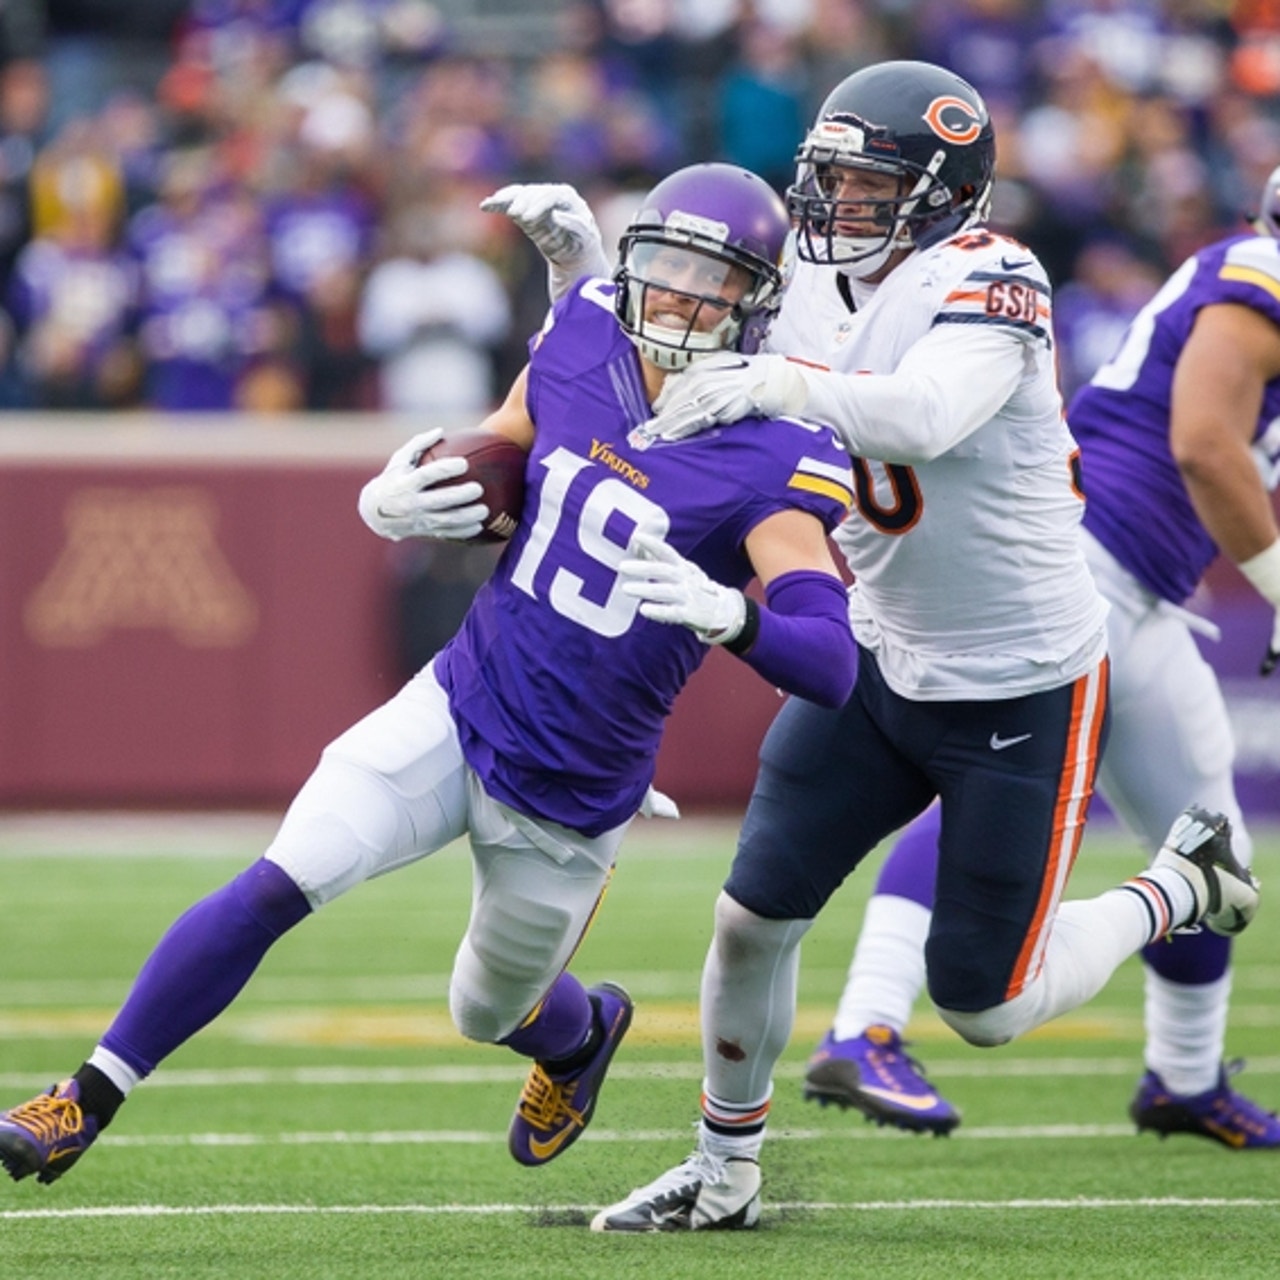 How to watch, listen to Chicago Bears at Minnesota Vikings